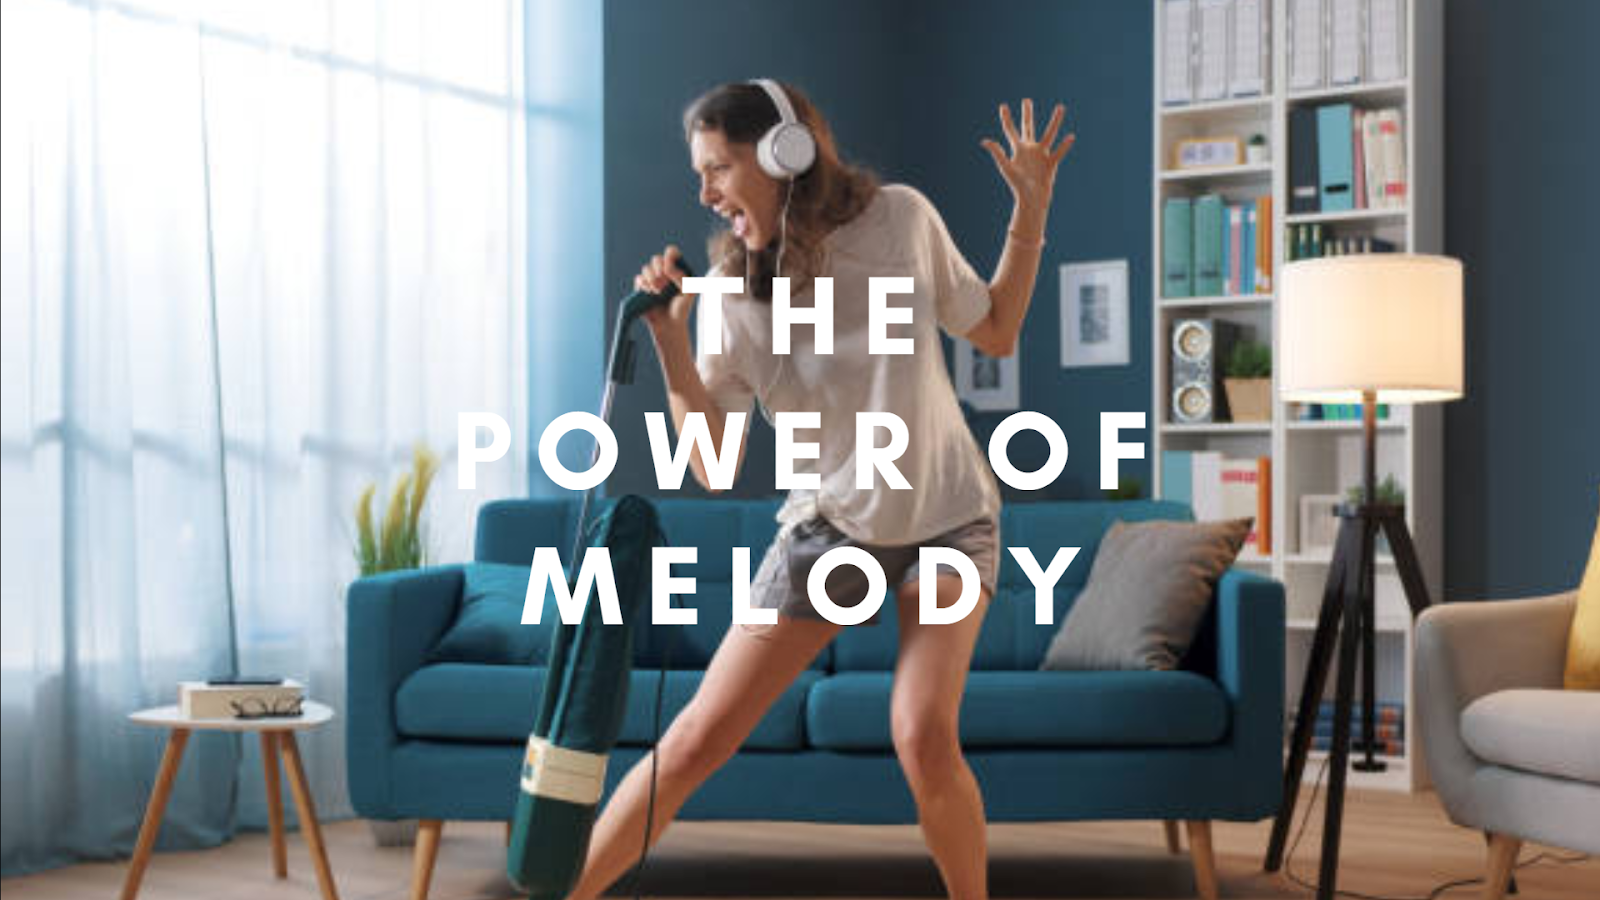 The Power of Melody